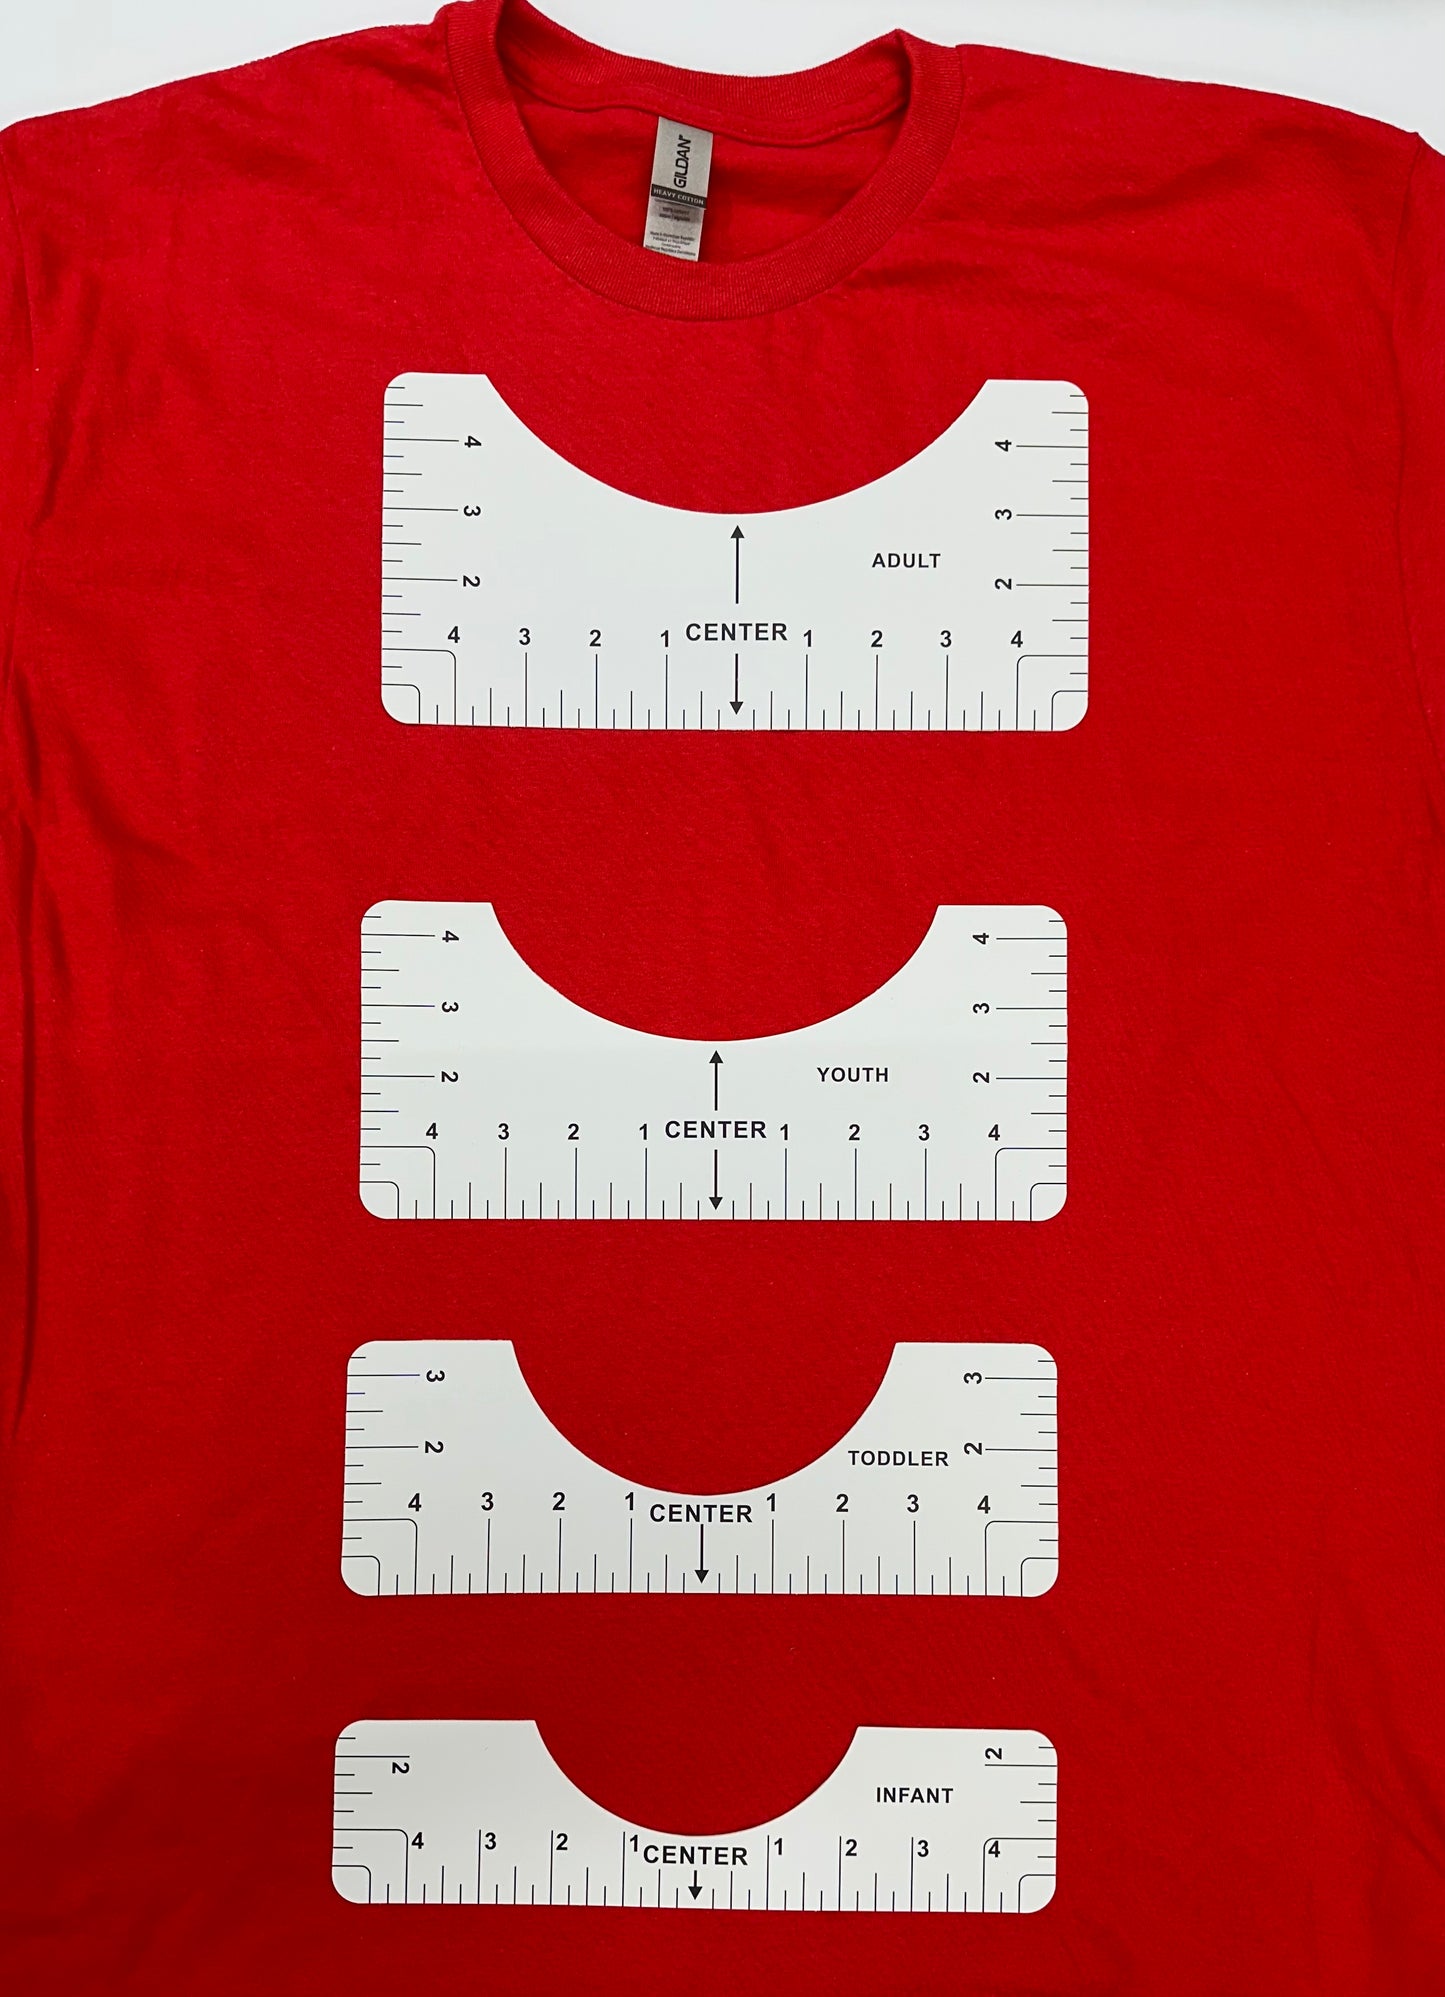 T-Shirt Allignment Tool